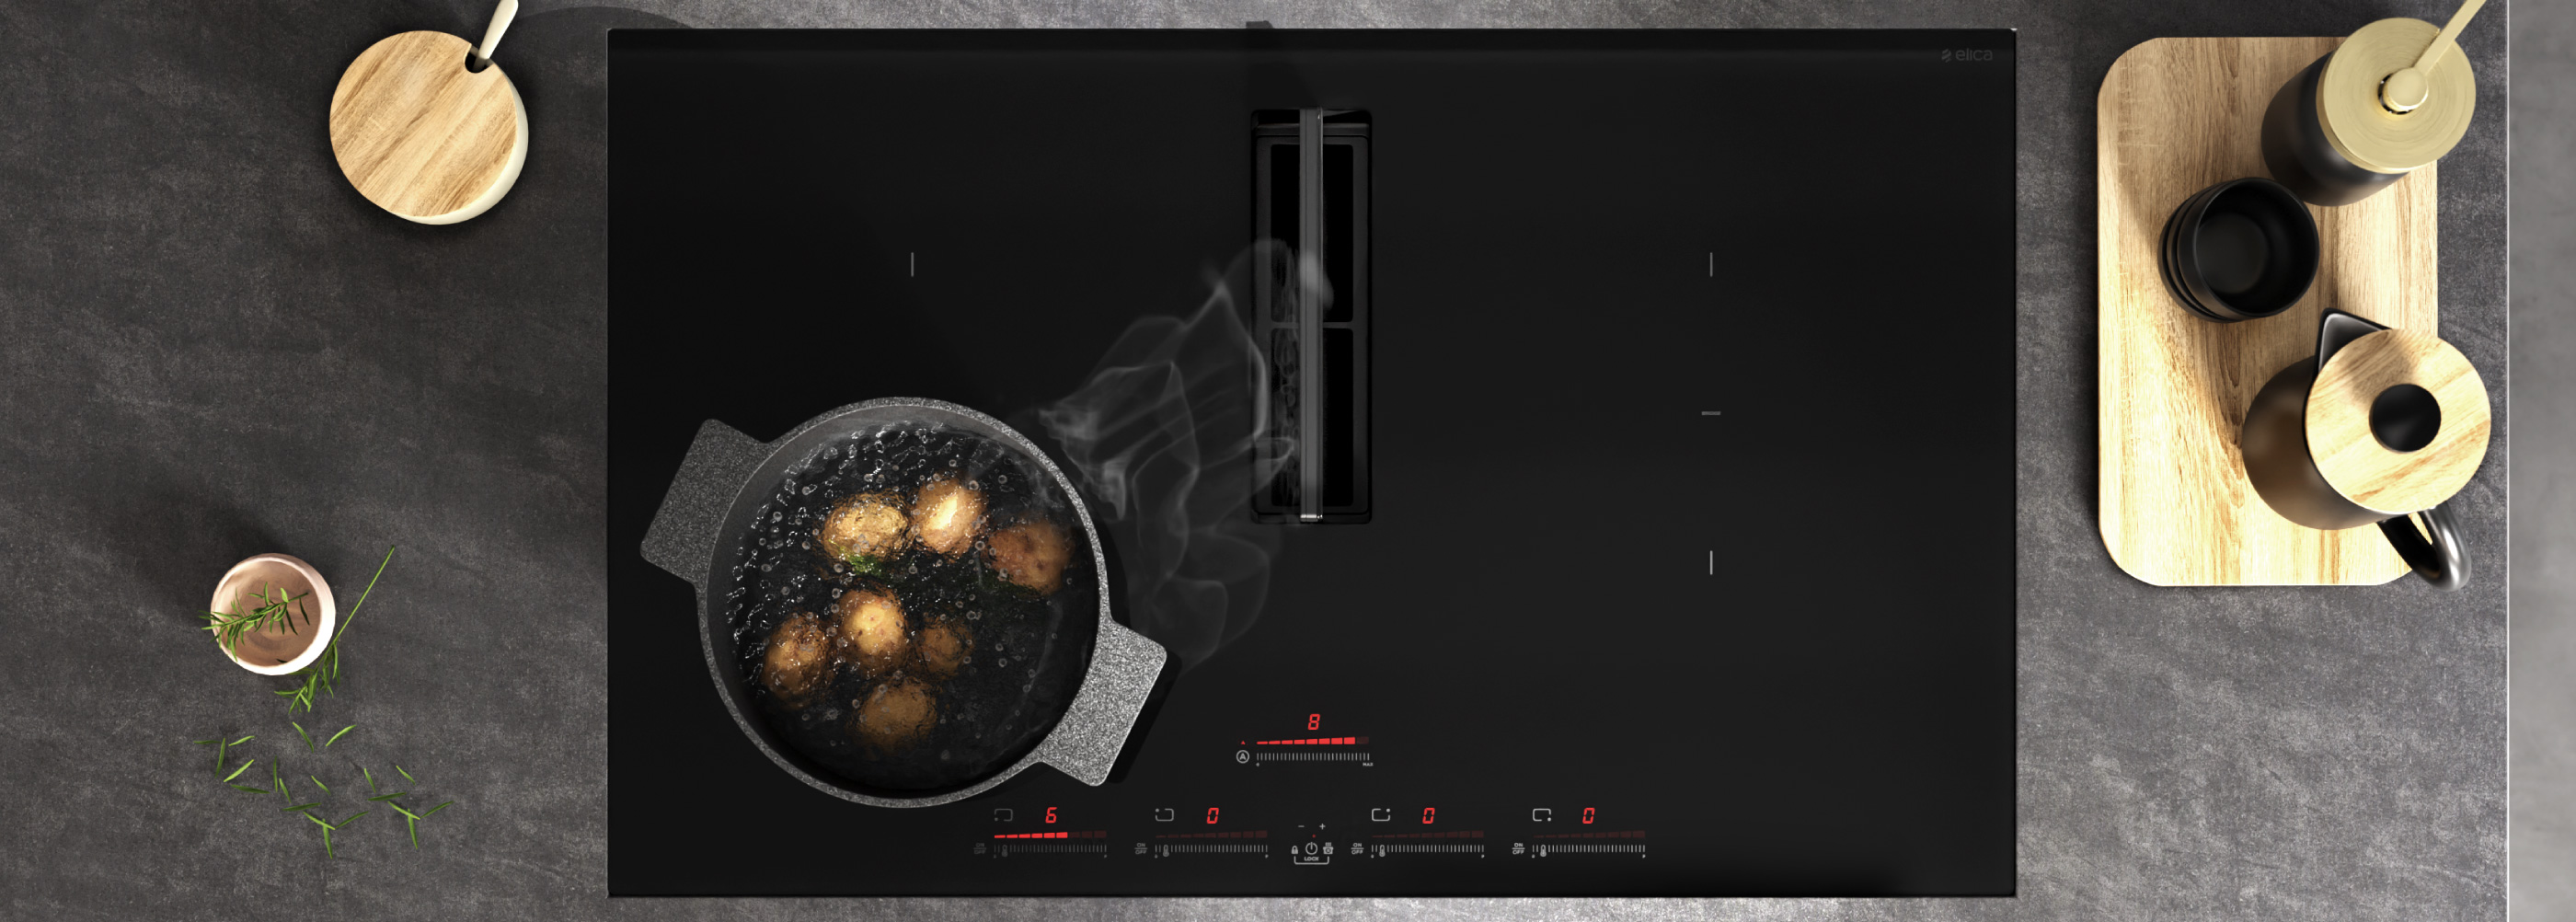 COOKING WILL NEVER BE THE SAME ONCE YOU TRY THE NIKOLATESLA FLUX COOKTOP